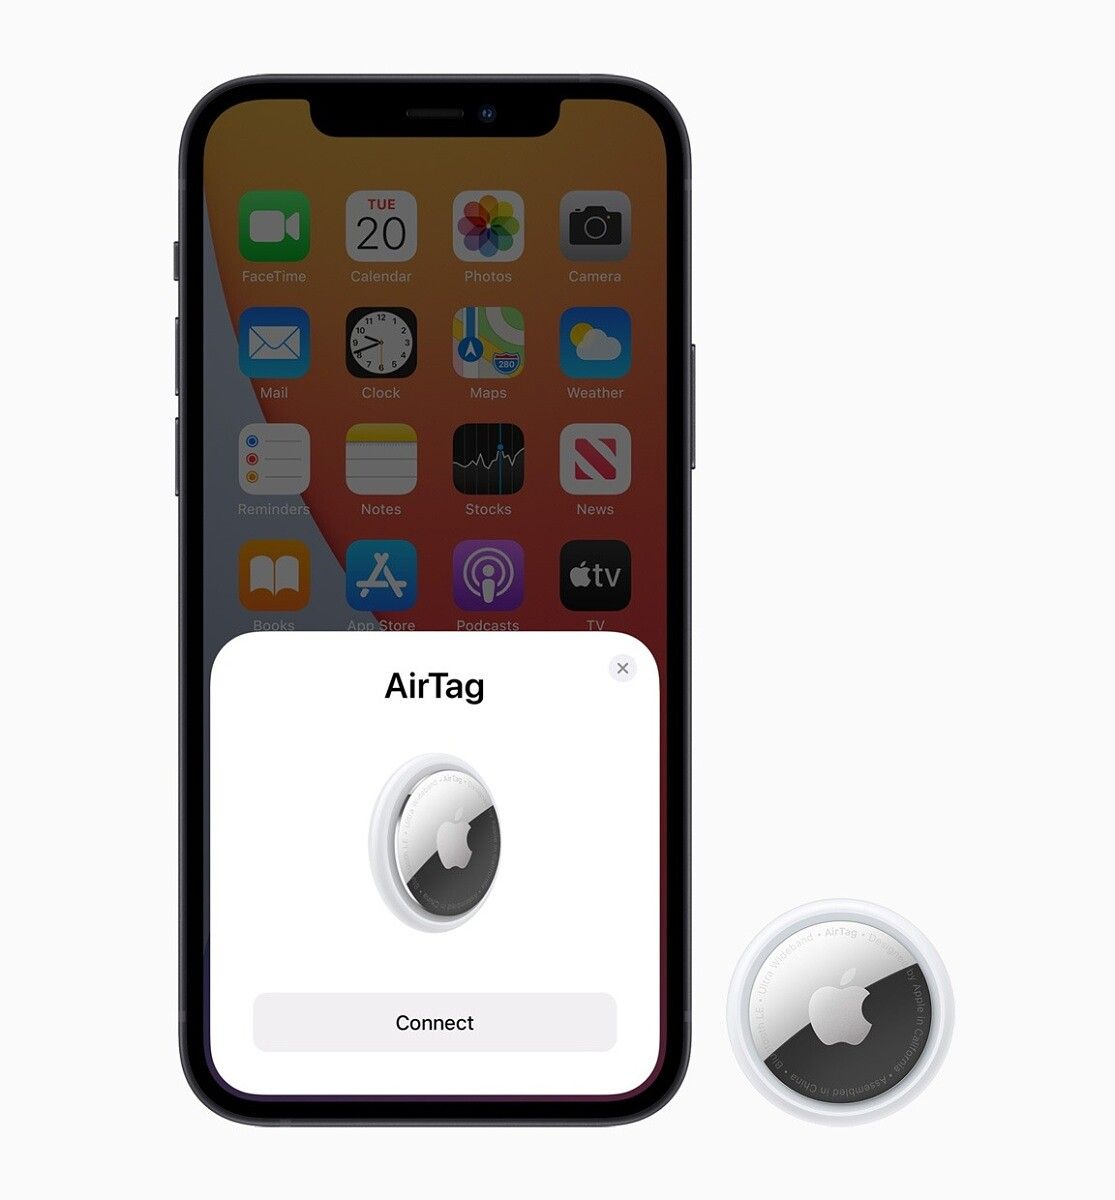 AirTag is a Find My Network tracker that offers tons of features to make sure your items don't get lost.